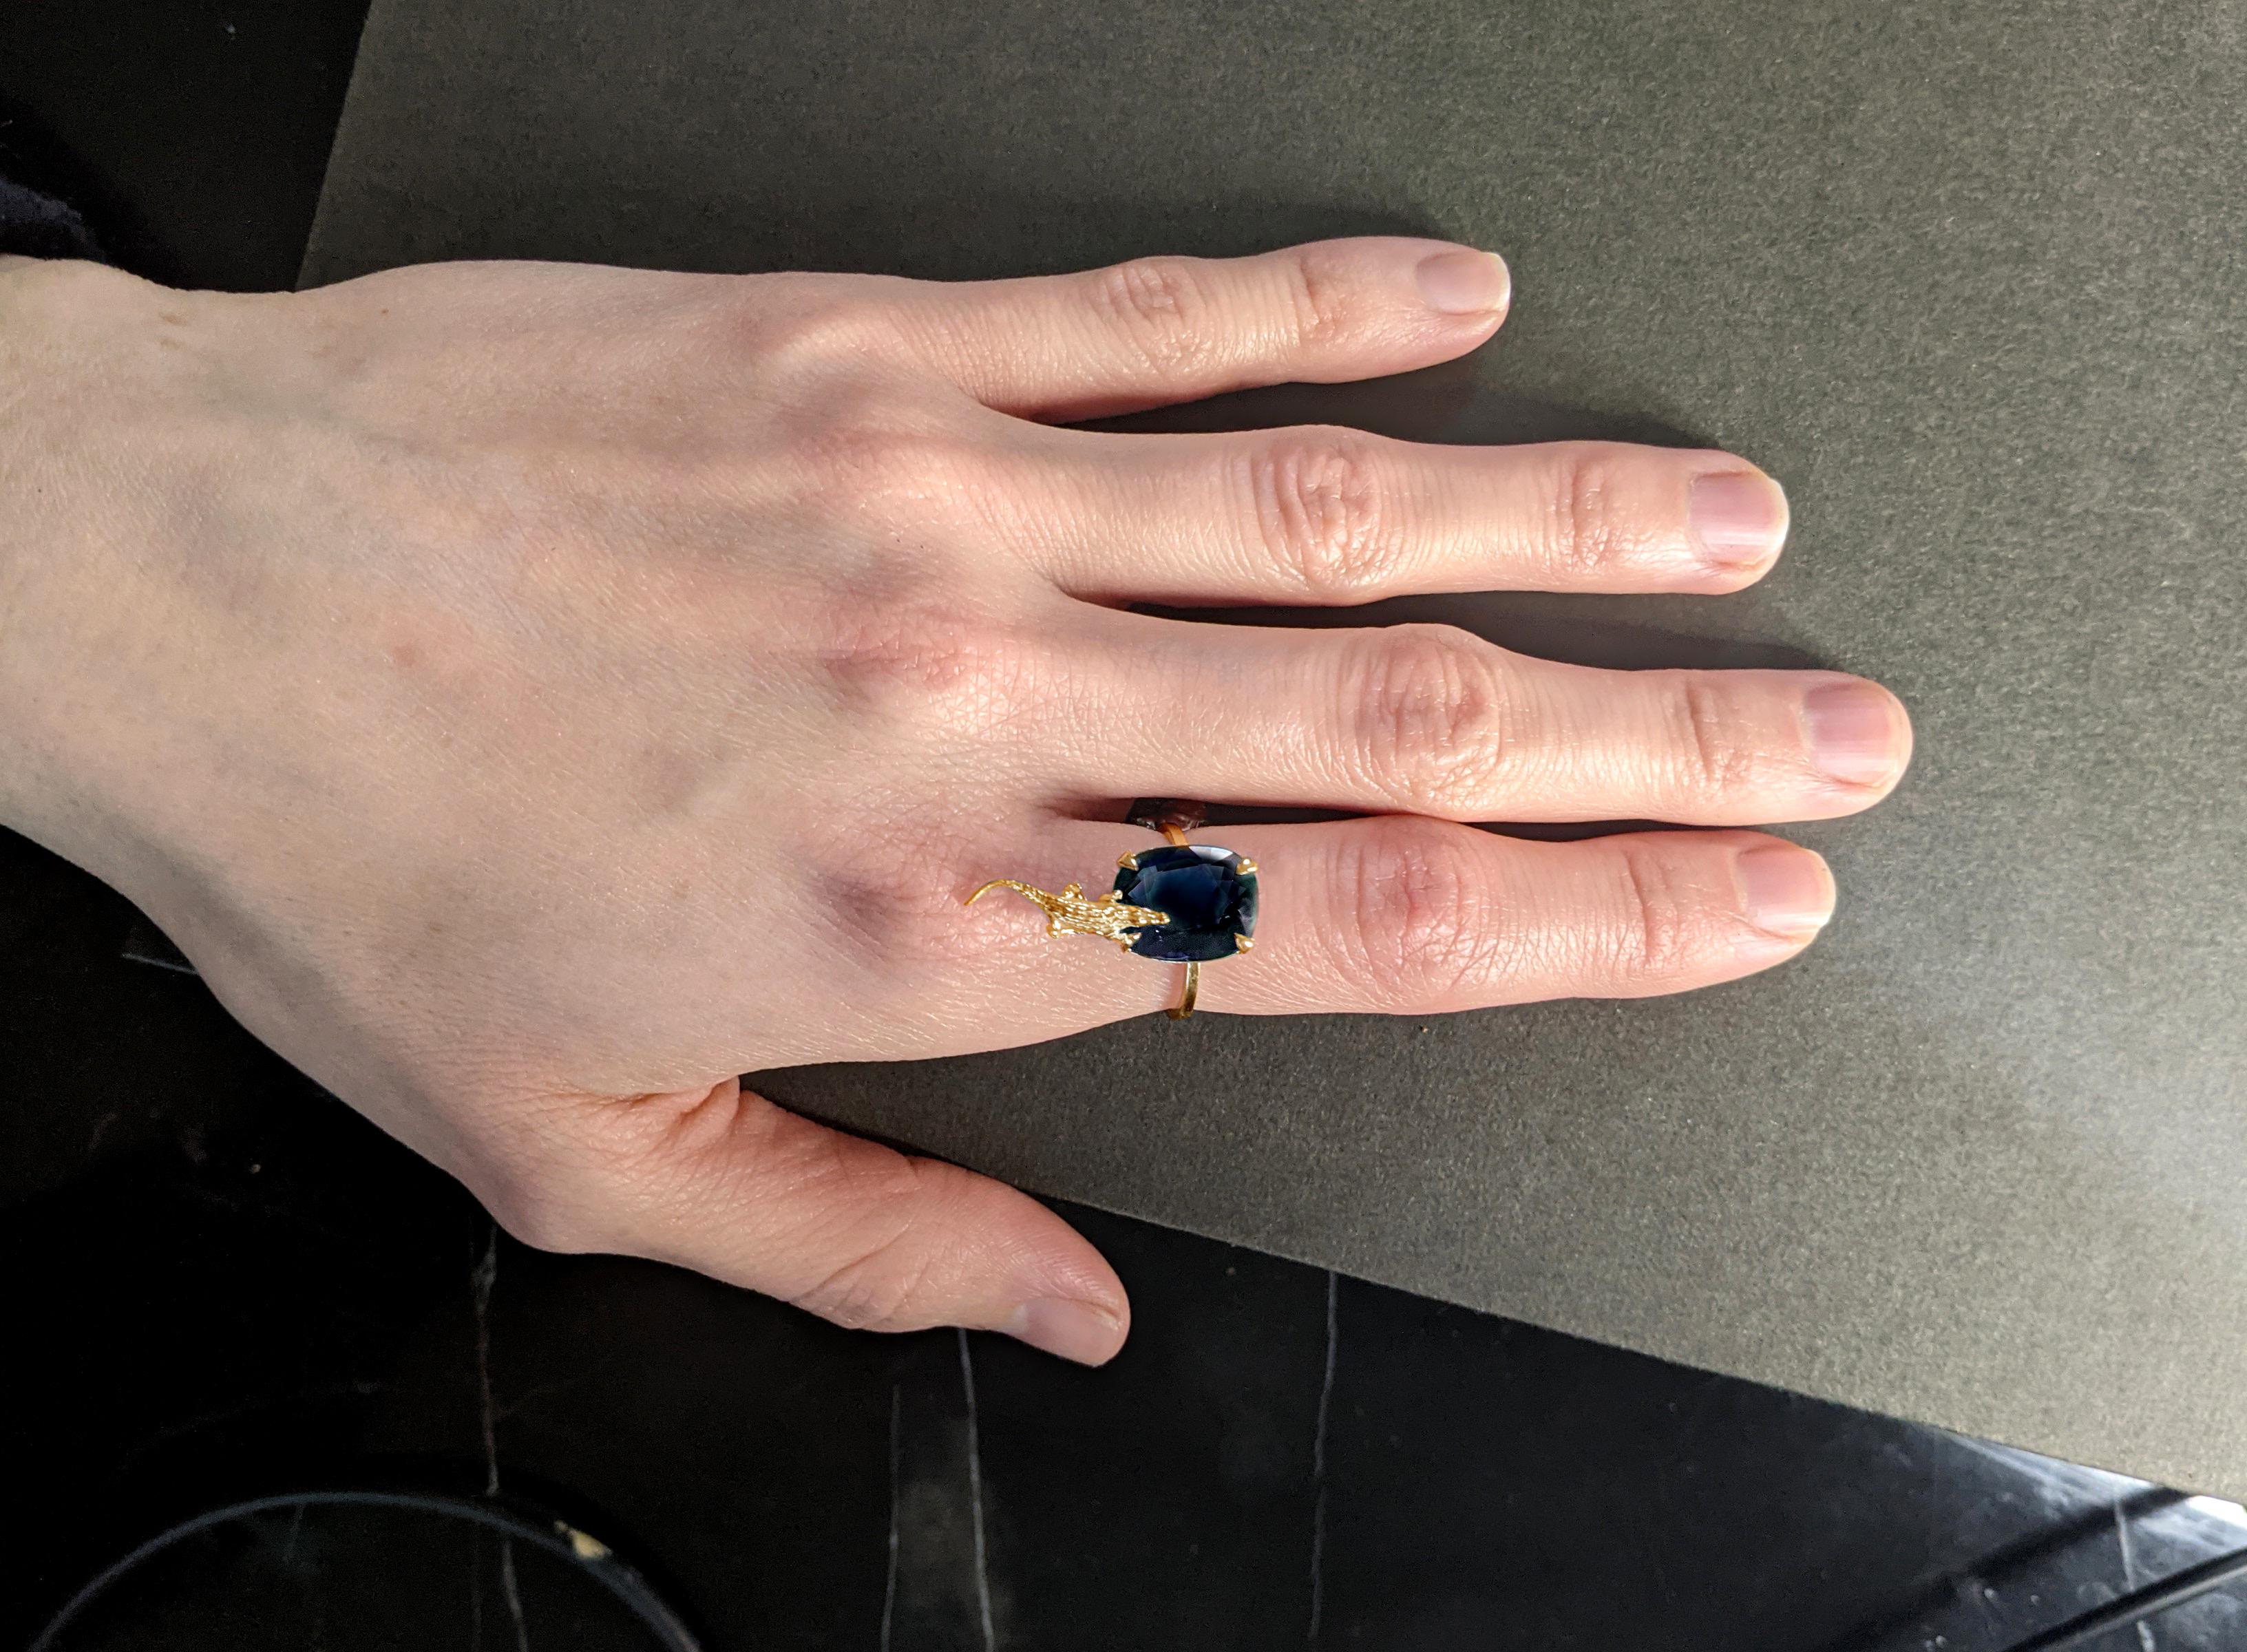 This contemporary Mesopotamian ring features a 4.32 carat natural dark blue cushion sapphire, 12.8x8.5 mm, encrusted in 18 karat yellow gold. The gem catches the eye.

You can order this piece in white, rose, or yellow gold, with spinel, rhodolite